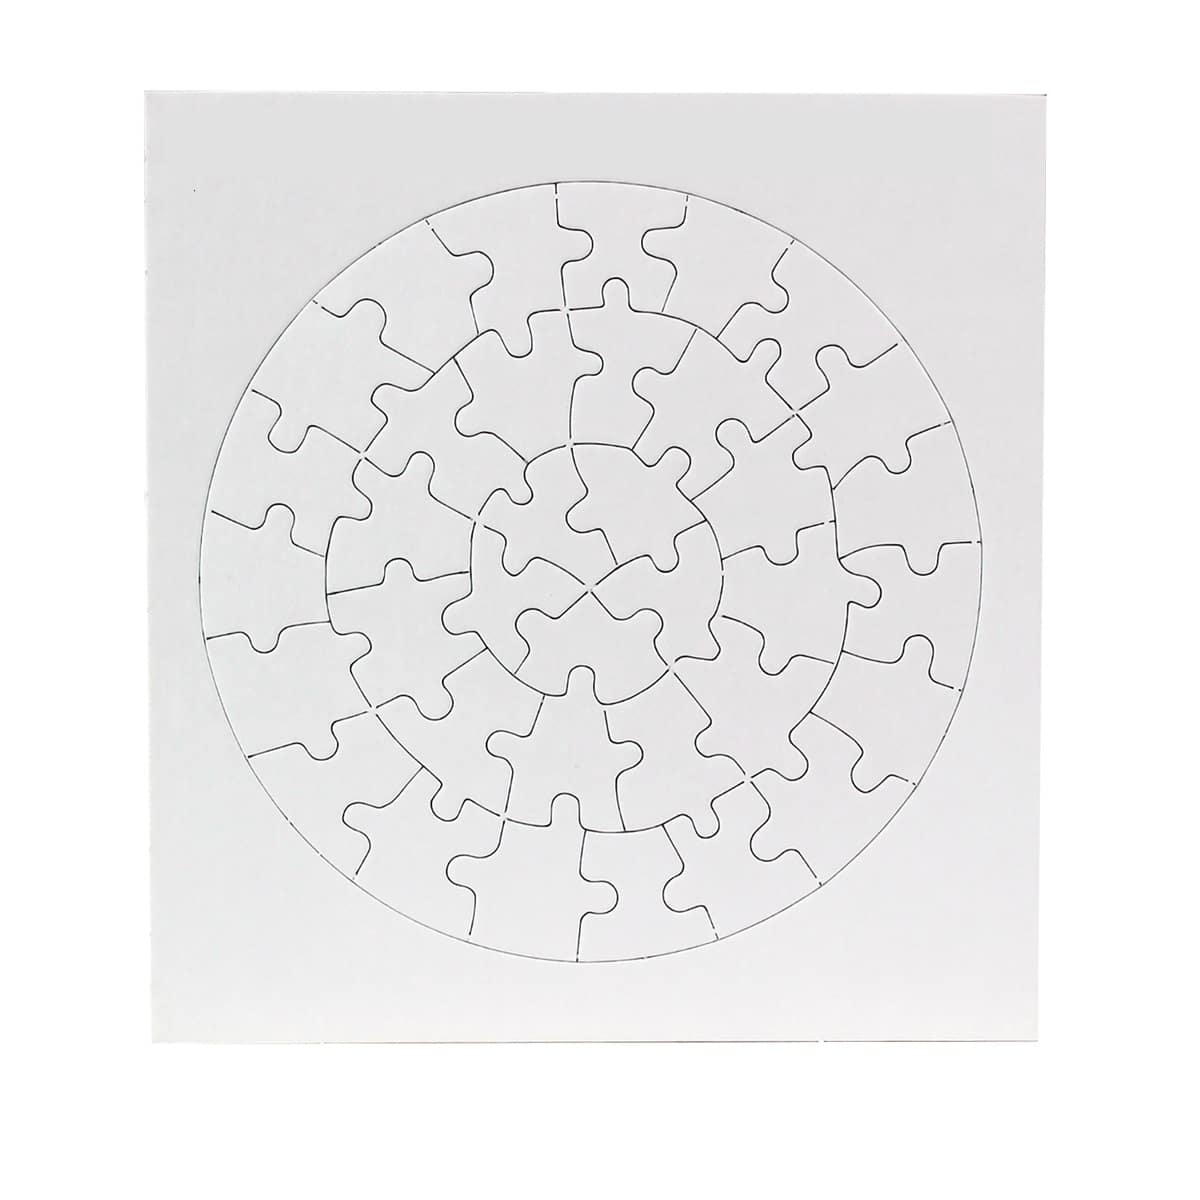 Blank Round Puzzles with Frames, Kids Crafts